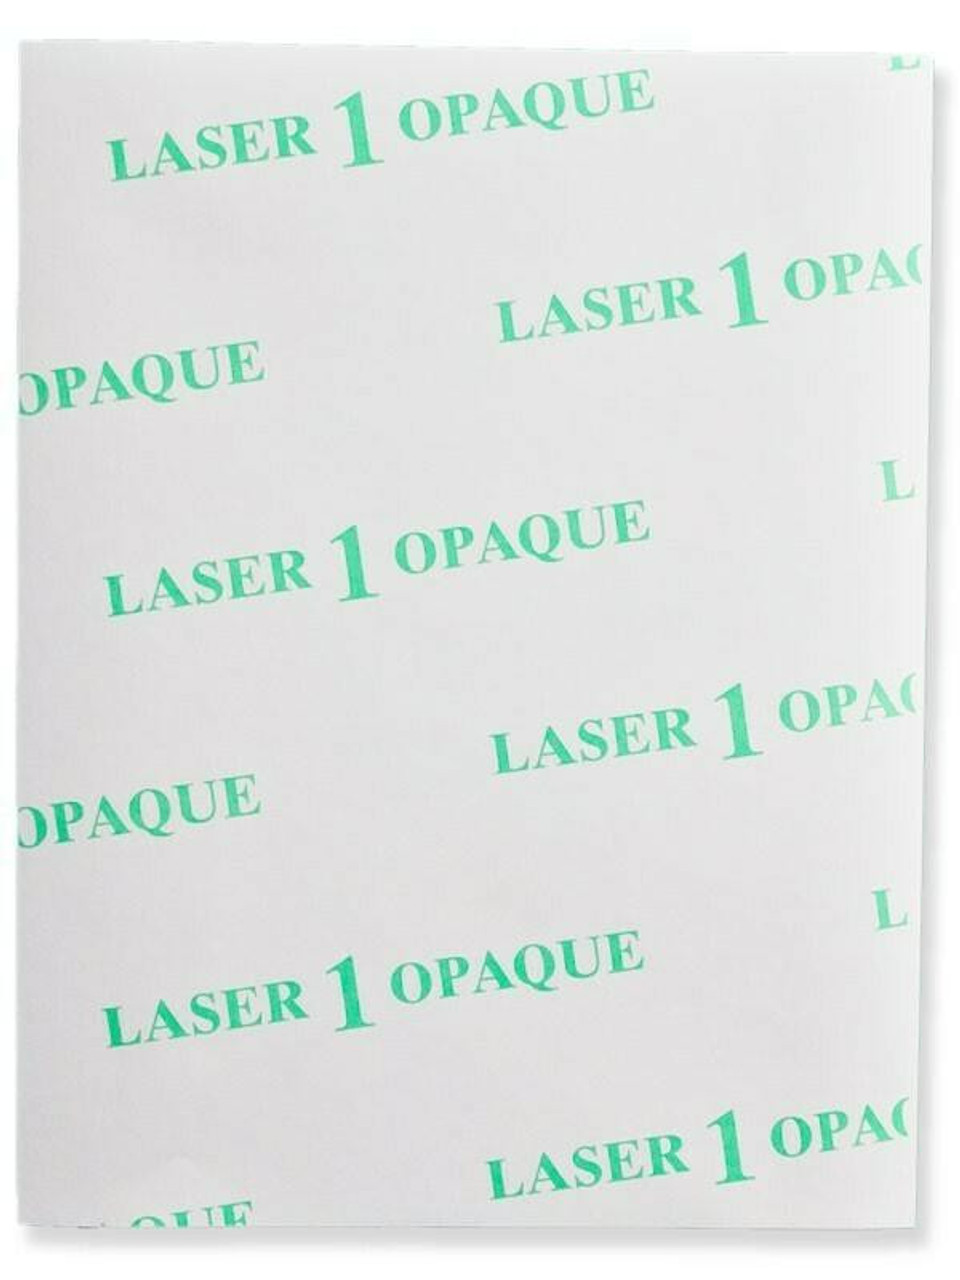 Laser 1 Opaque Transfer Paper - 11 x 17